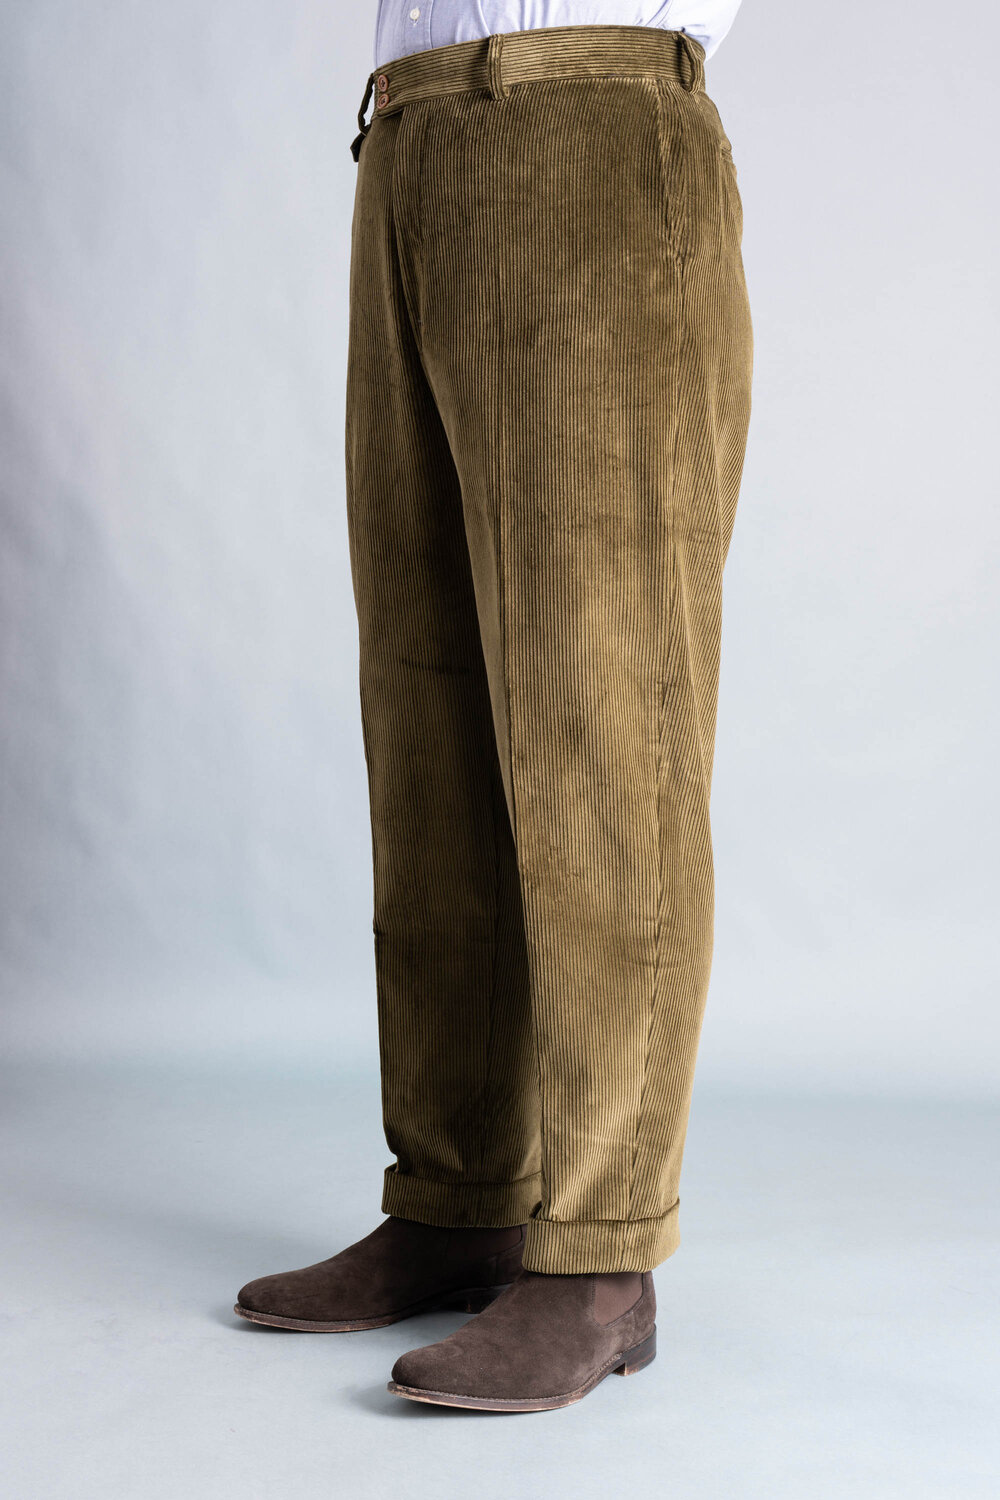 Khaki Drab Corduroy Trousers - Stancliffe Flat-Front in 8-Wale Cotton -  Fort Belvedere